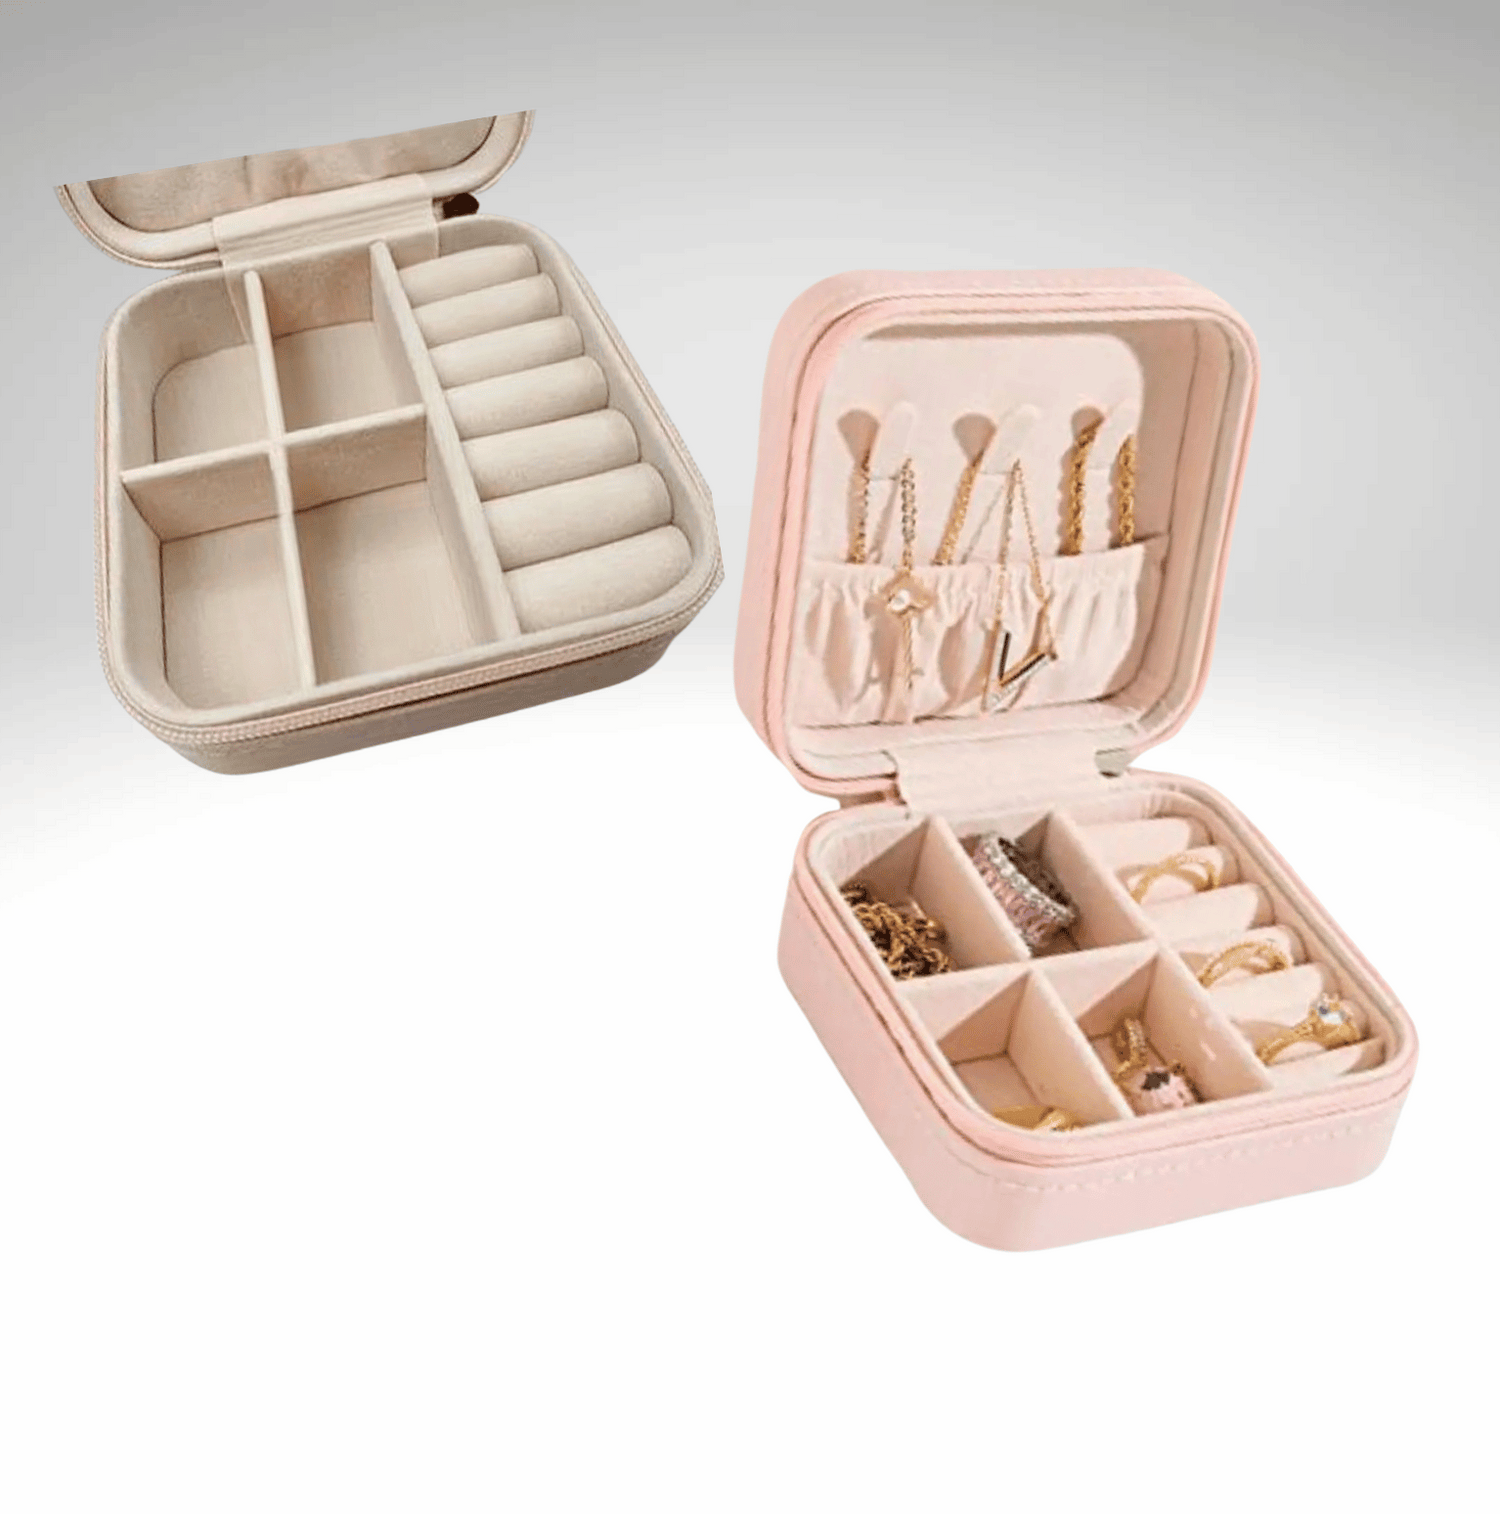 Blush Colored Jewelry Case- Personalization included